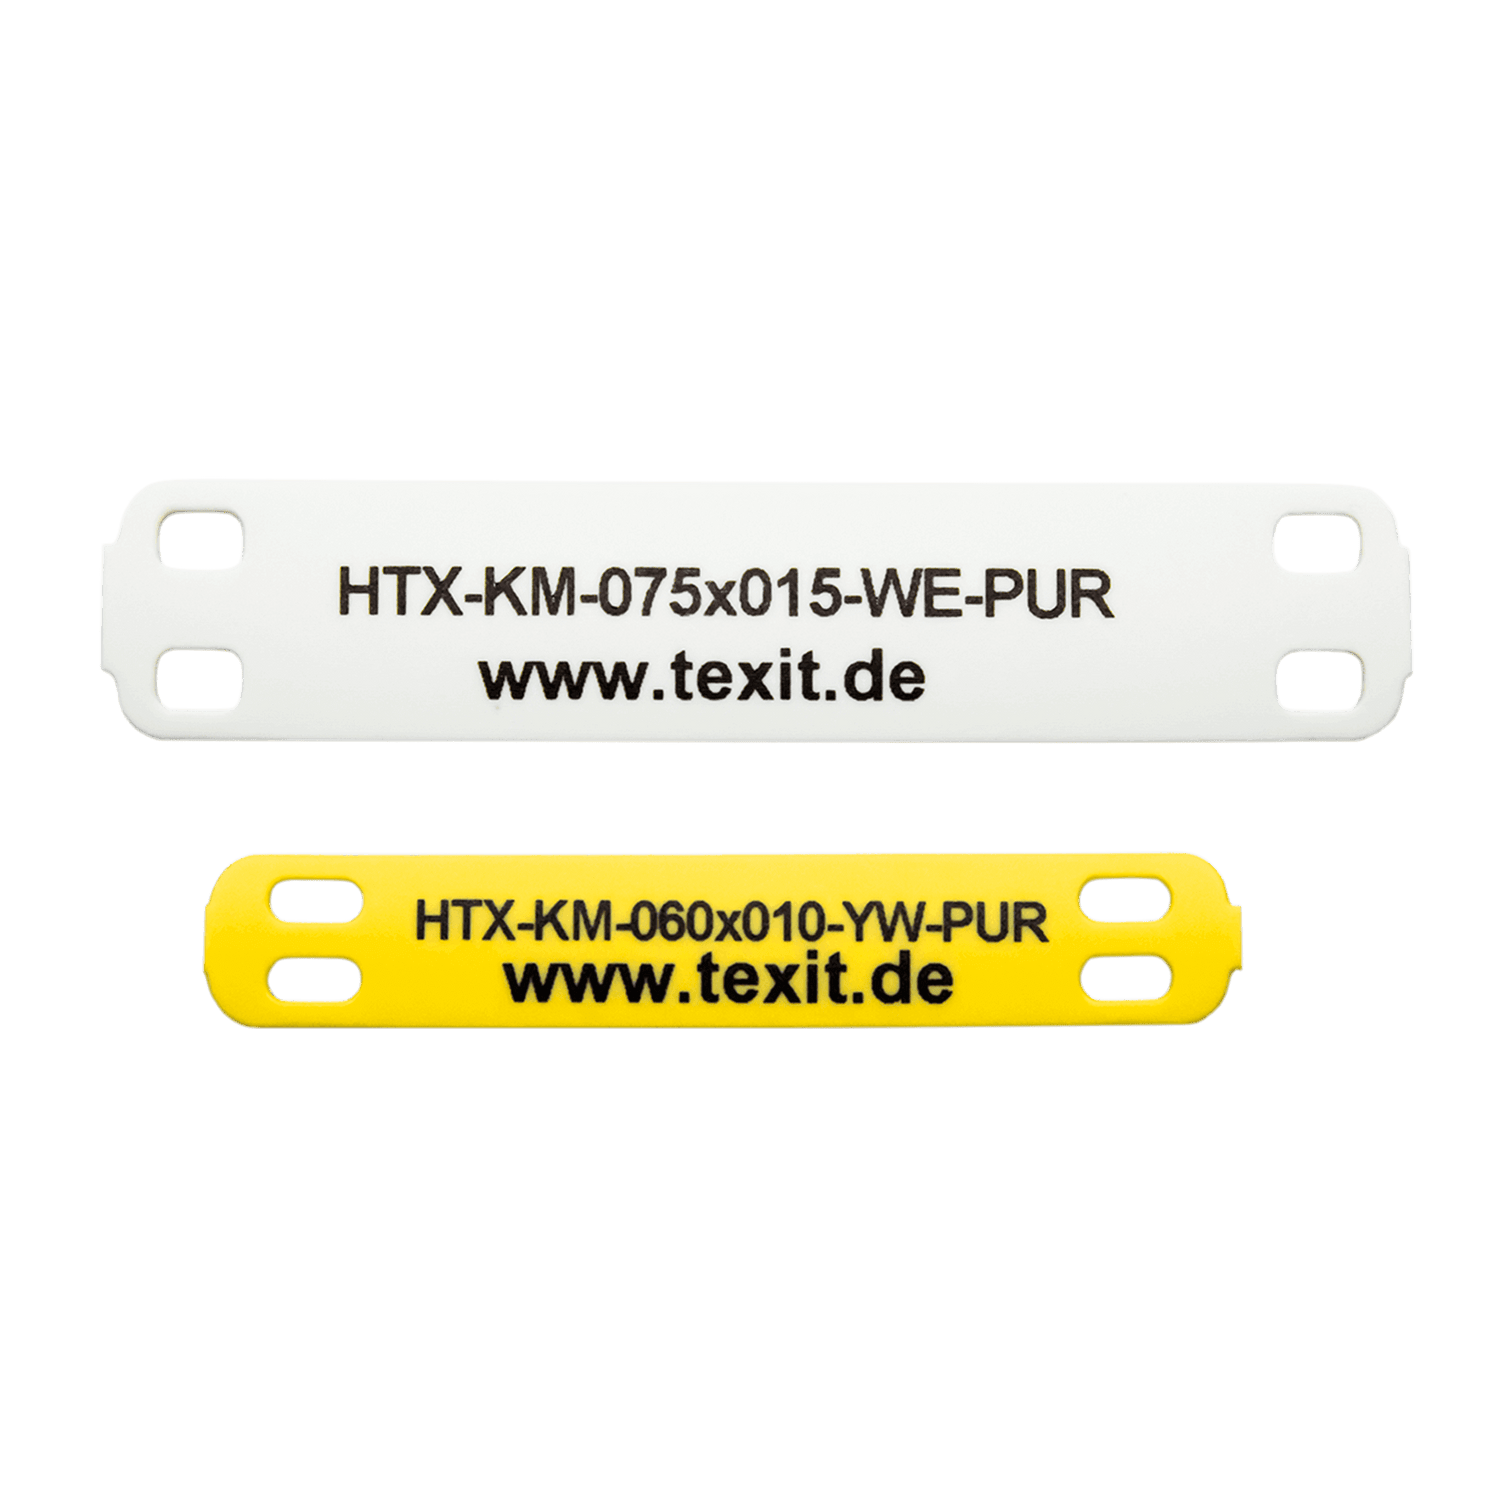 Cable marker cable tie Texit